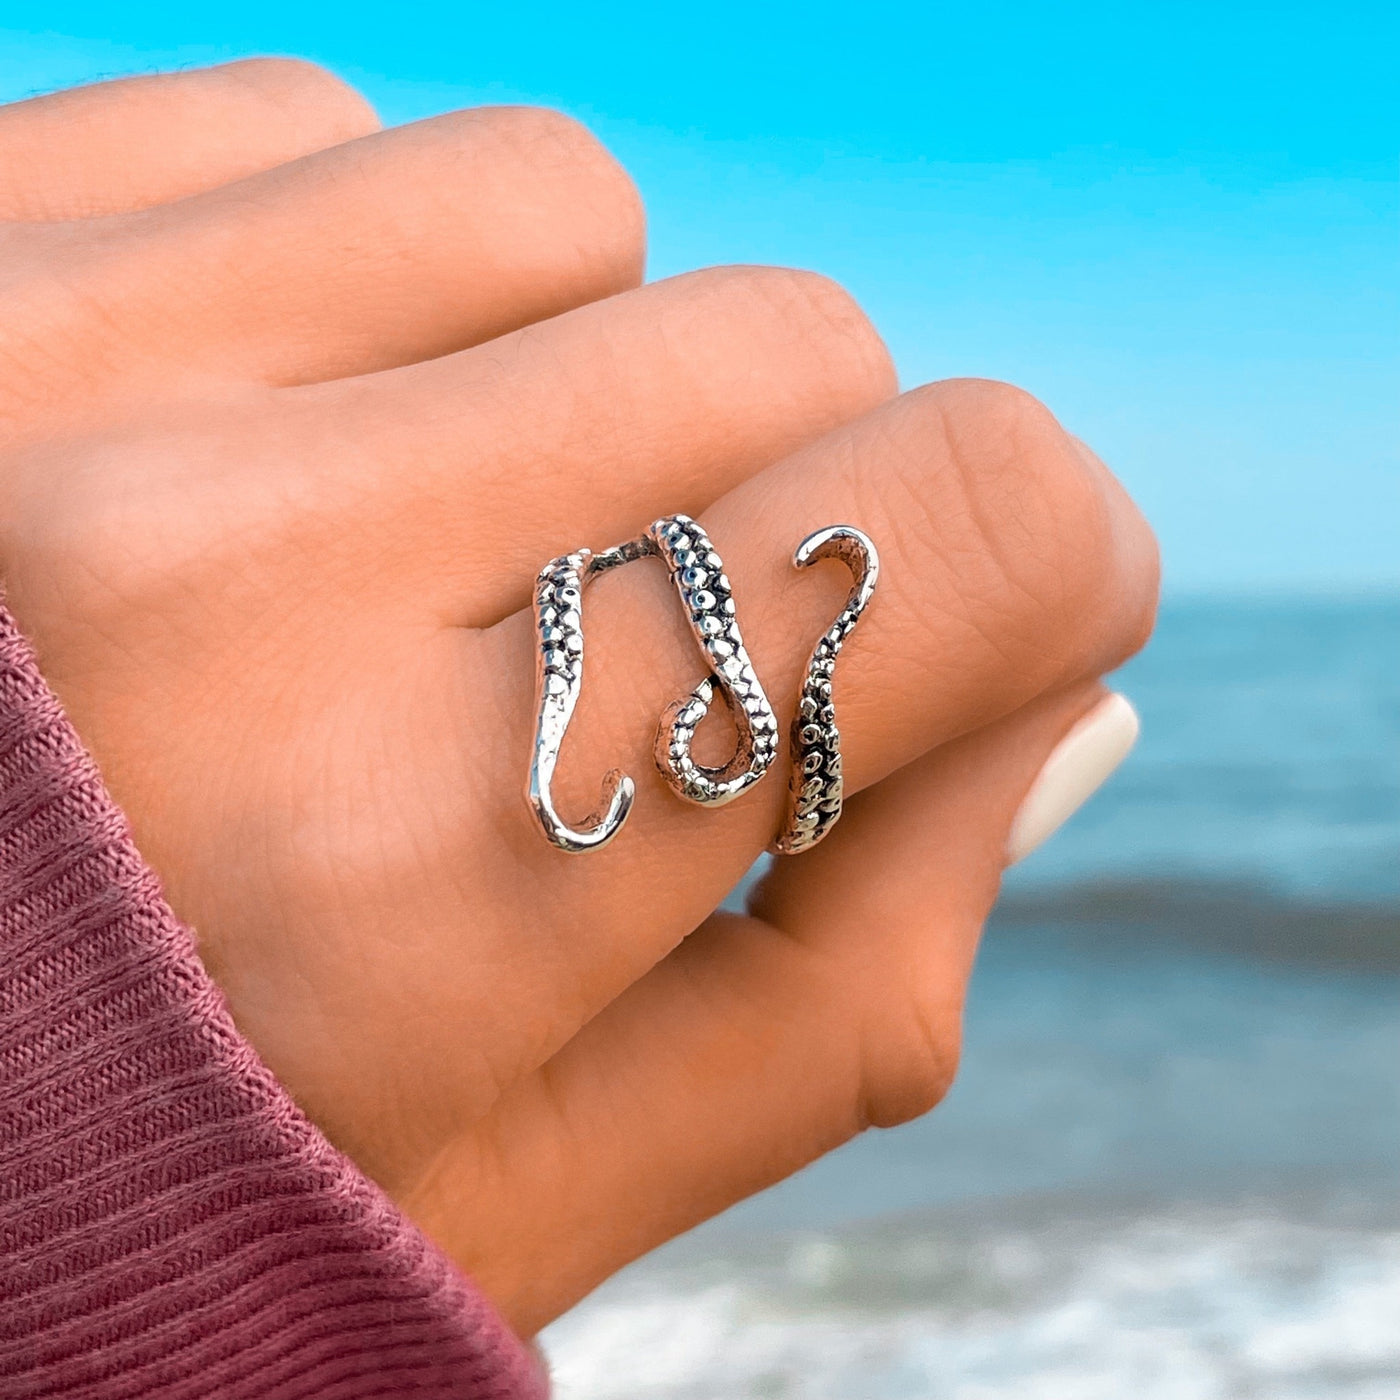 Silver Octopus Wrap Ring